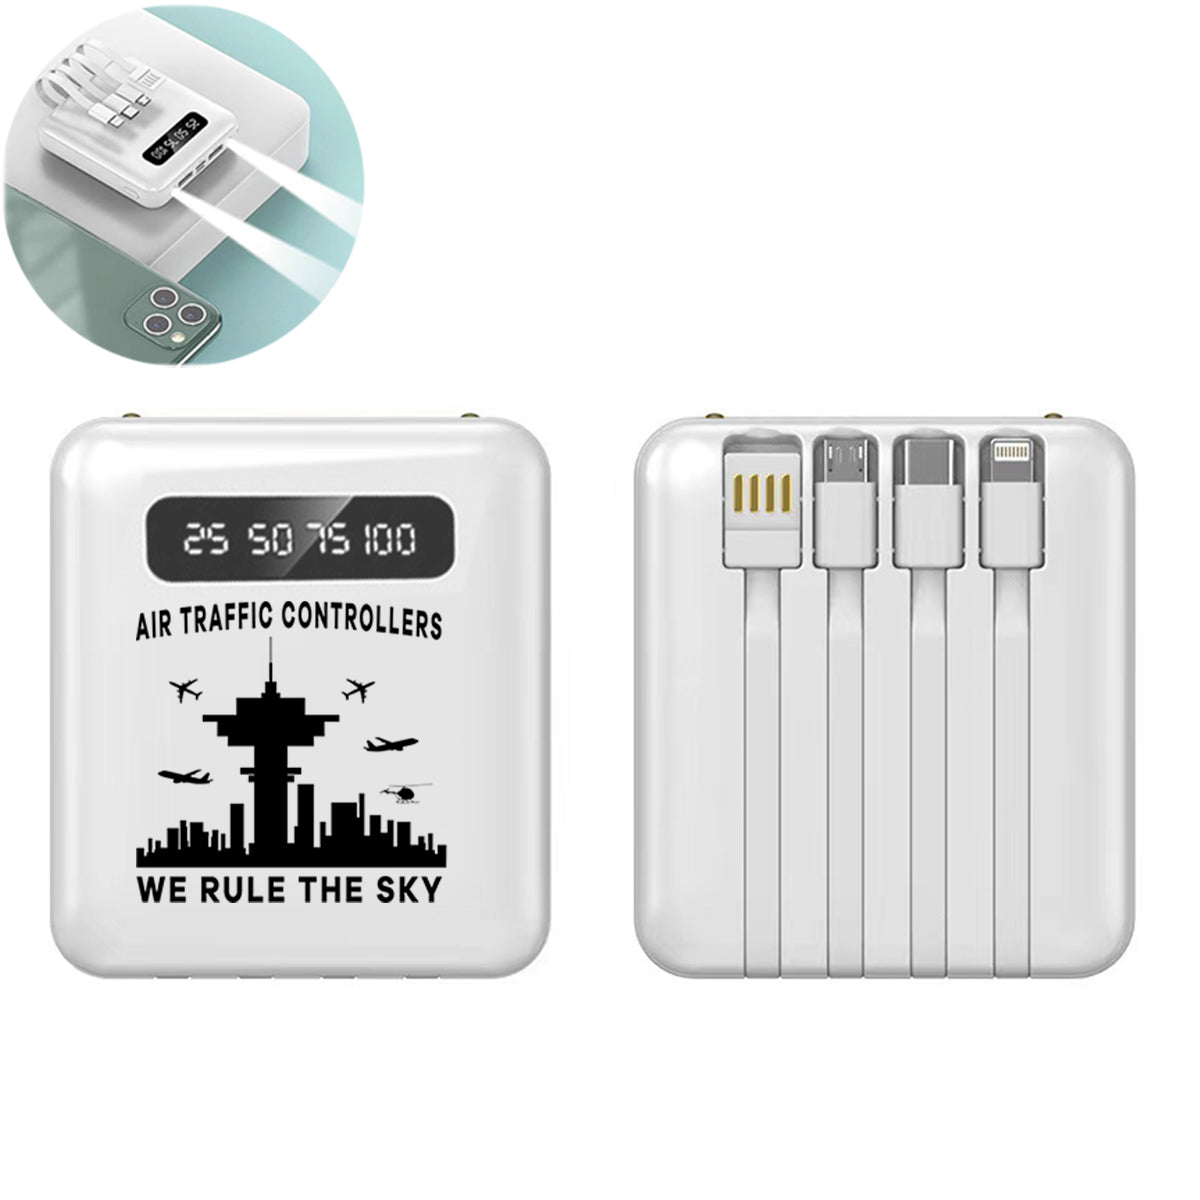 Air Traffic Controllers - We Rule The Sky Designed 10000mAh Quick Charge Powerbank